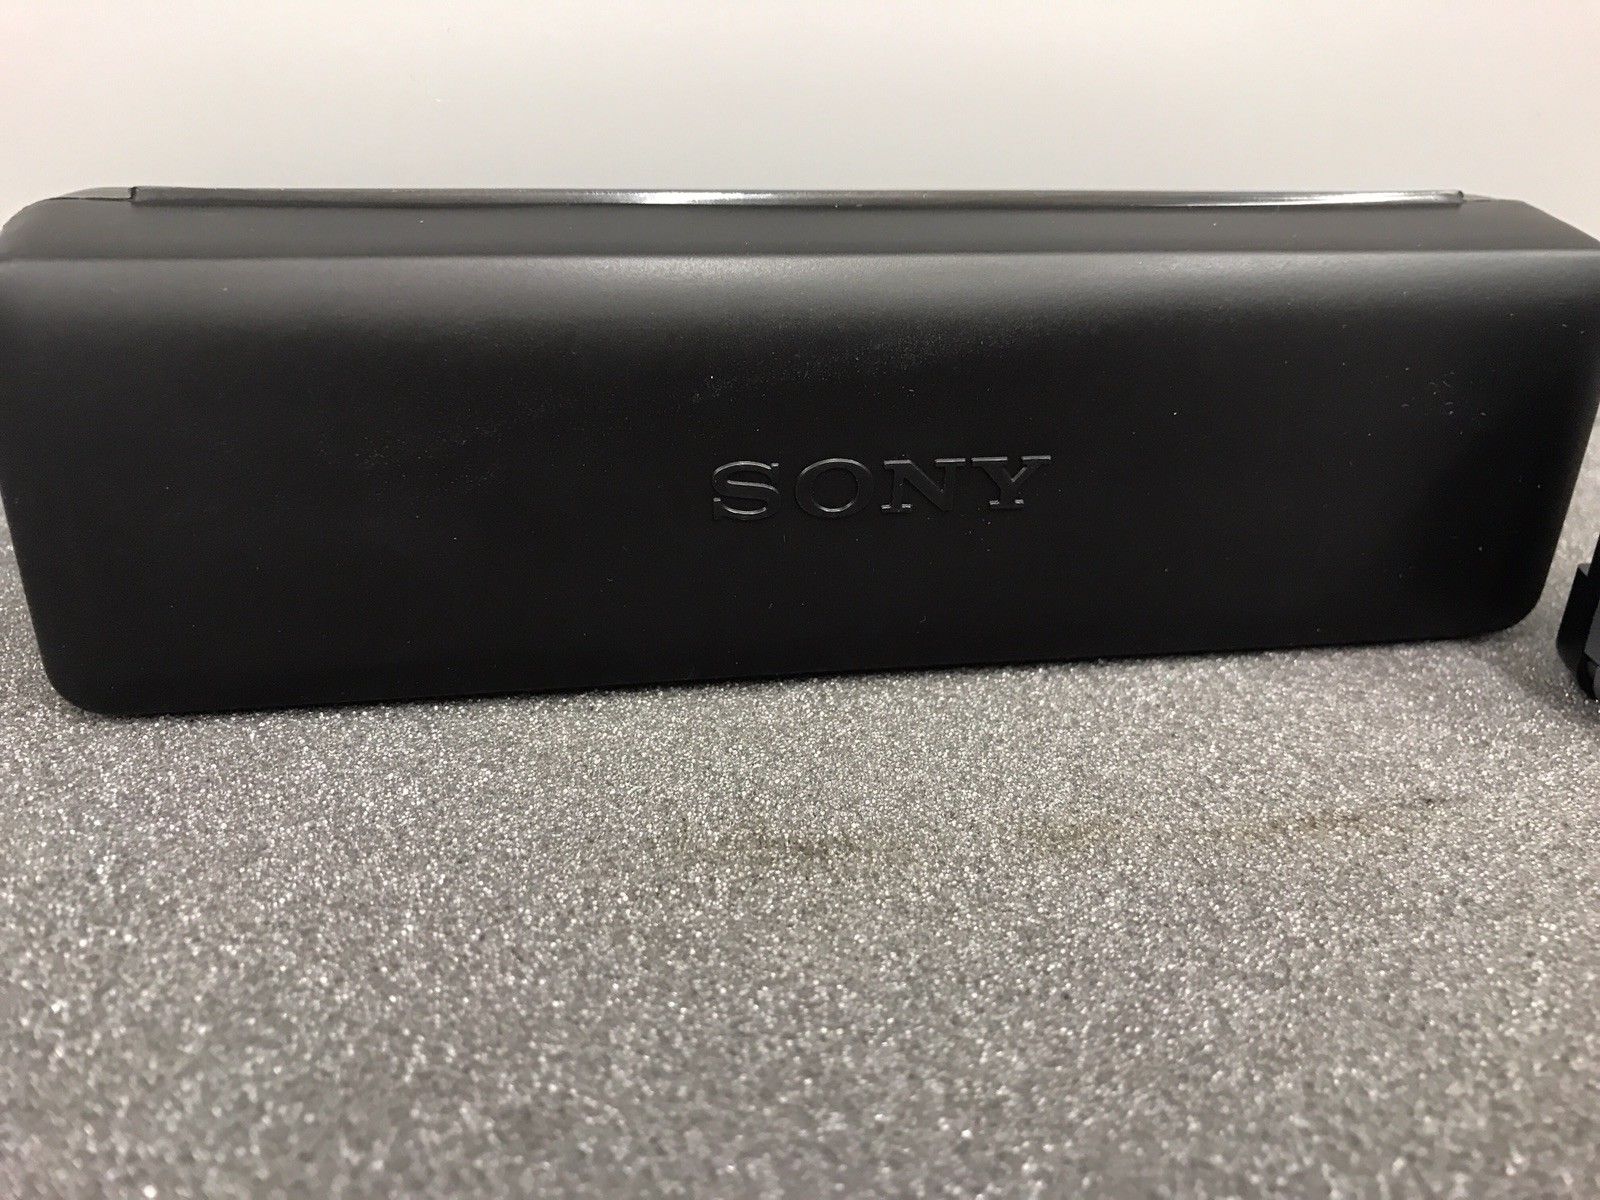 Sony Cdx-C4850r Cdxc4850r New Face Front Panel and Case Rare New complete face